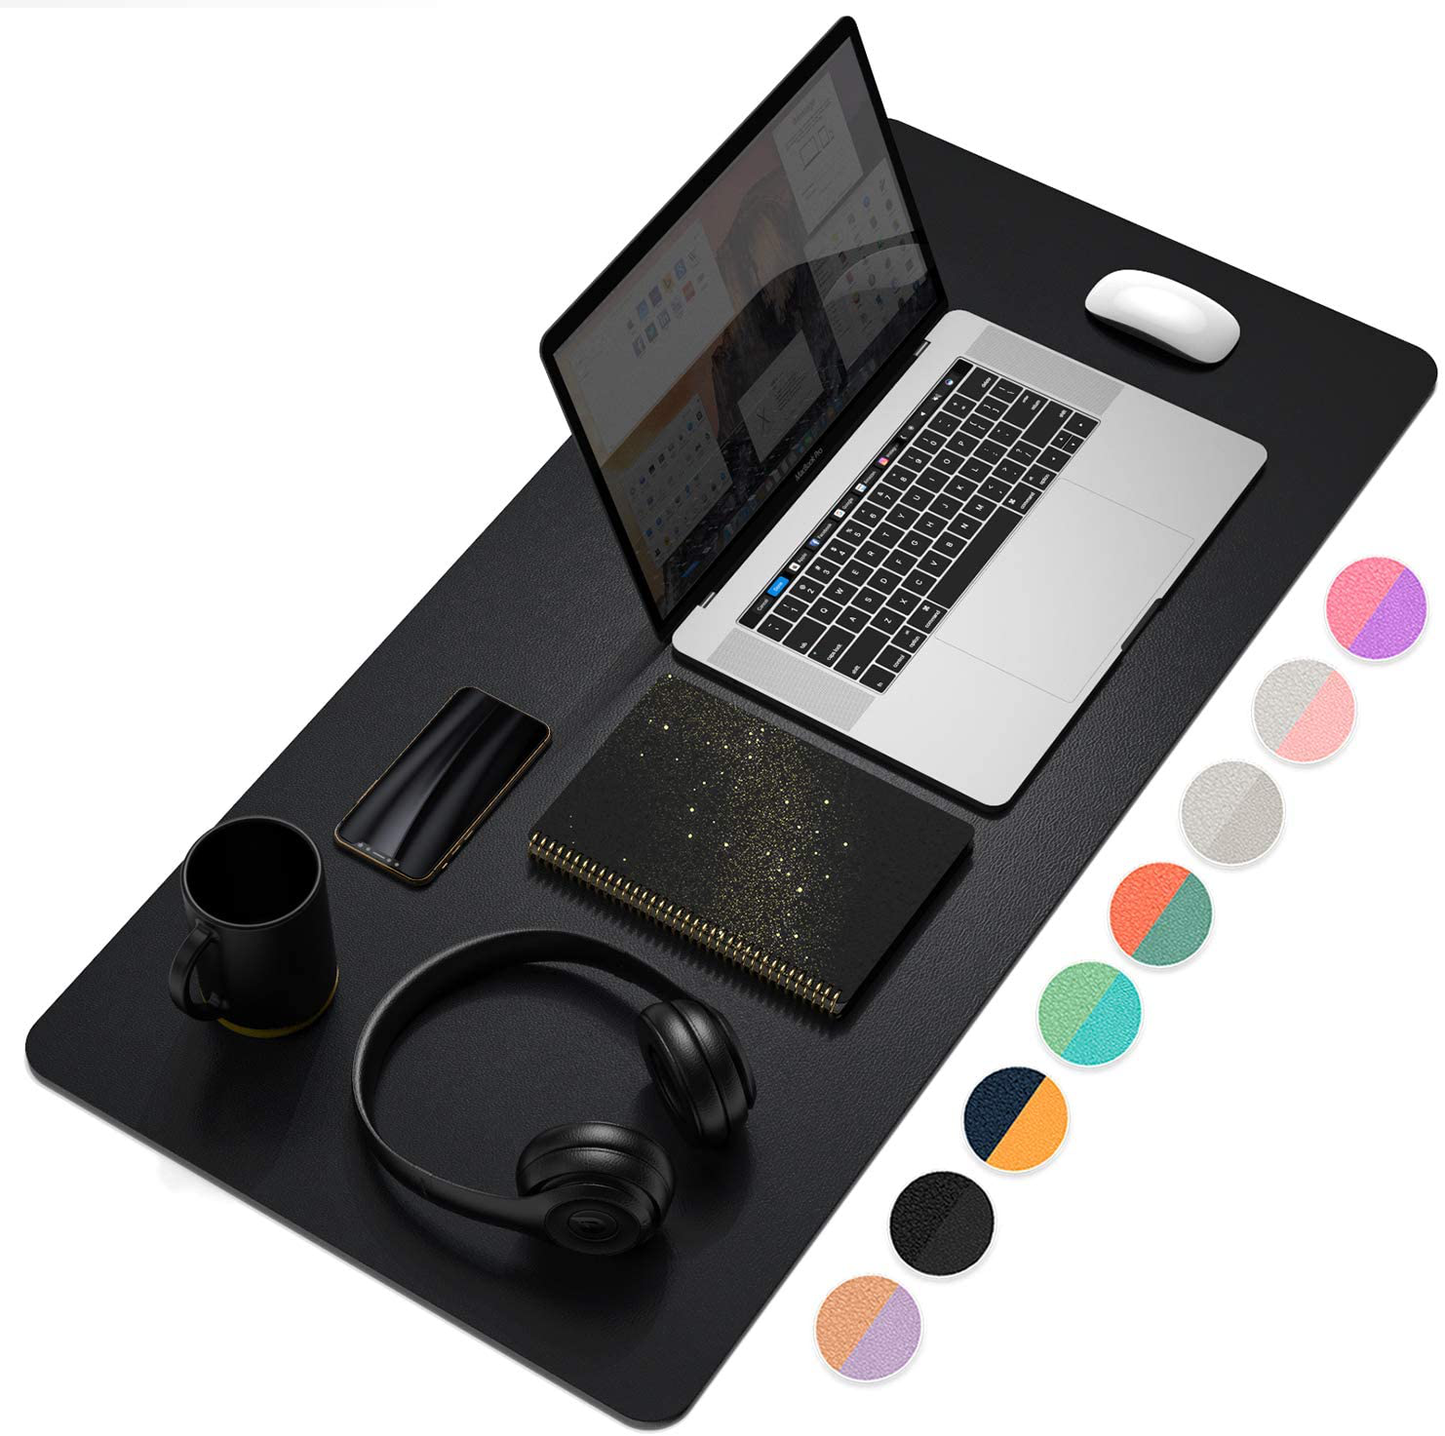 YSAGi Multifunctional Office Desk Pad, Ultra Thin Waterproof PU Leather Mouse Pad, Dual Use Desk Writing Mat for Office/Home (31.5" x 15.7", Black)